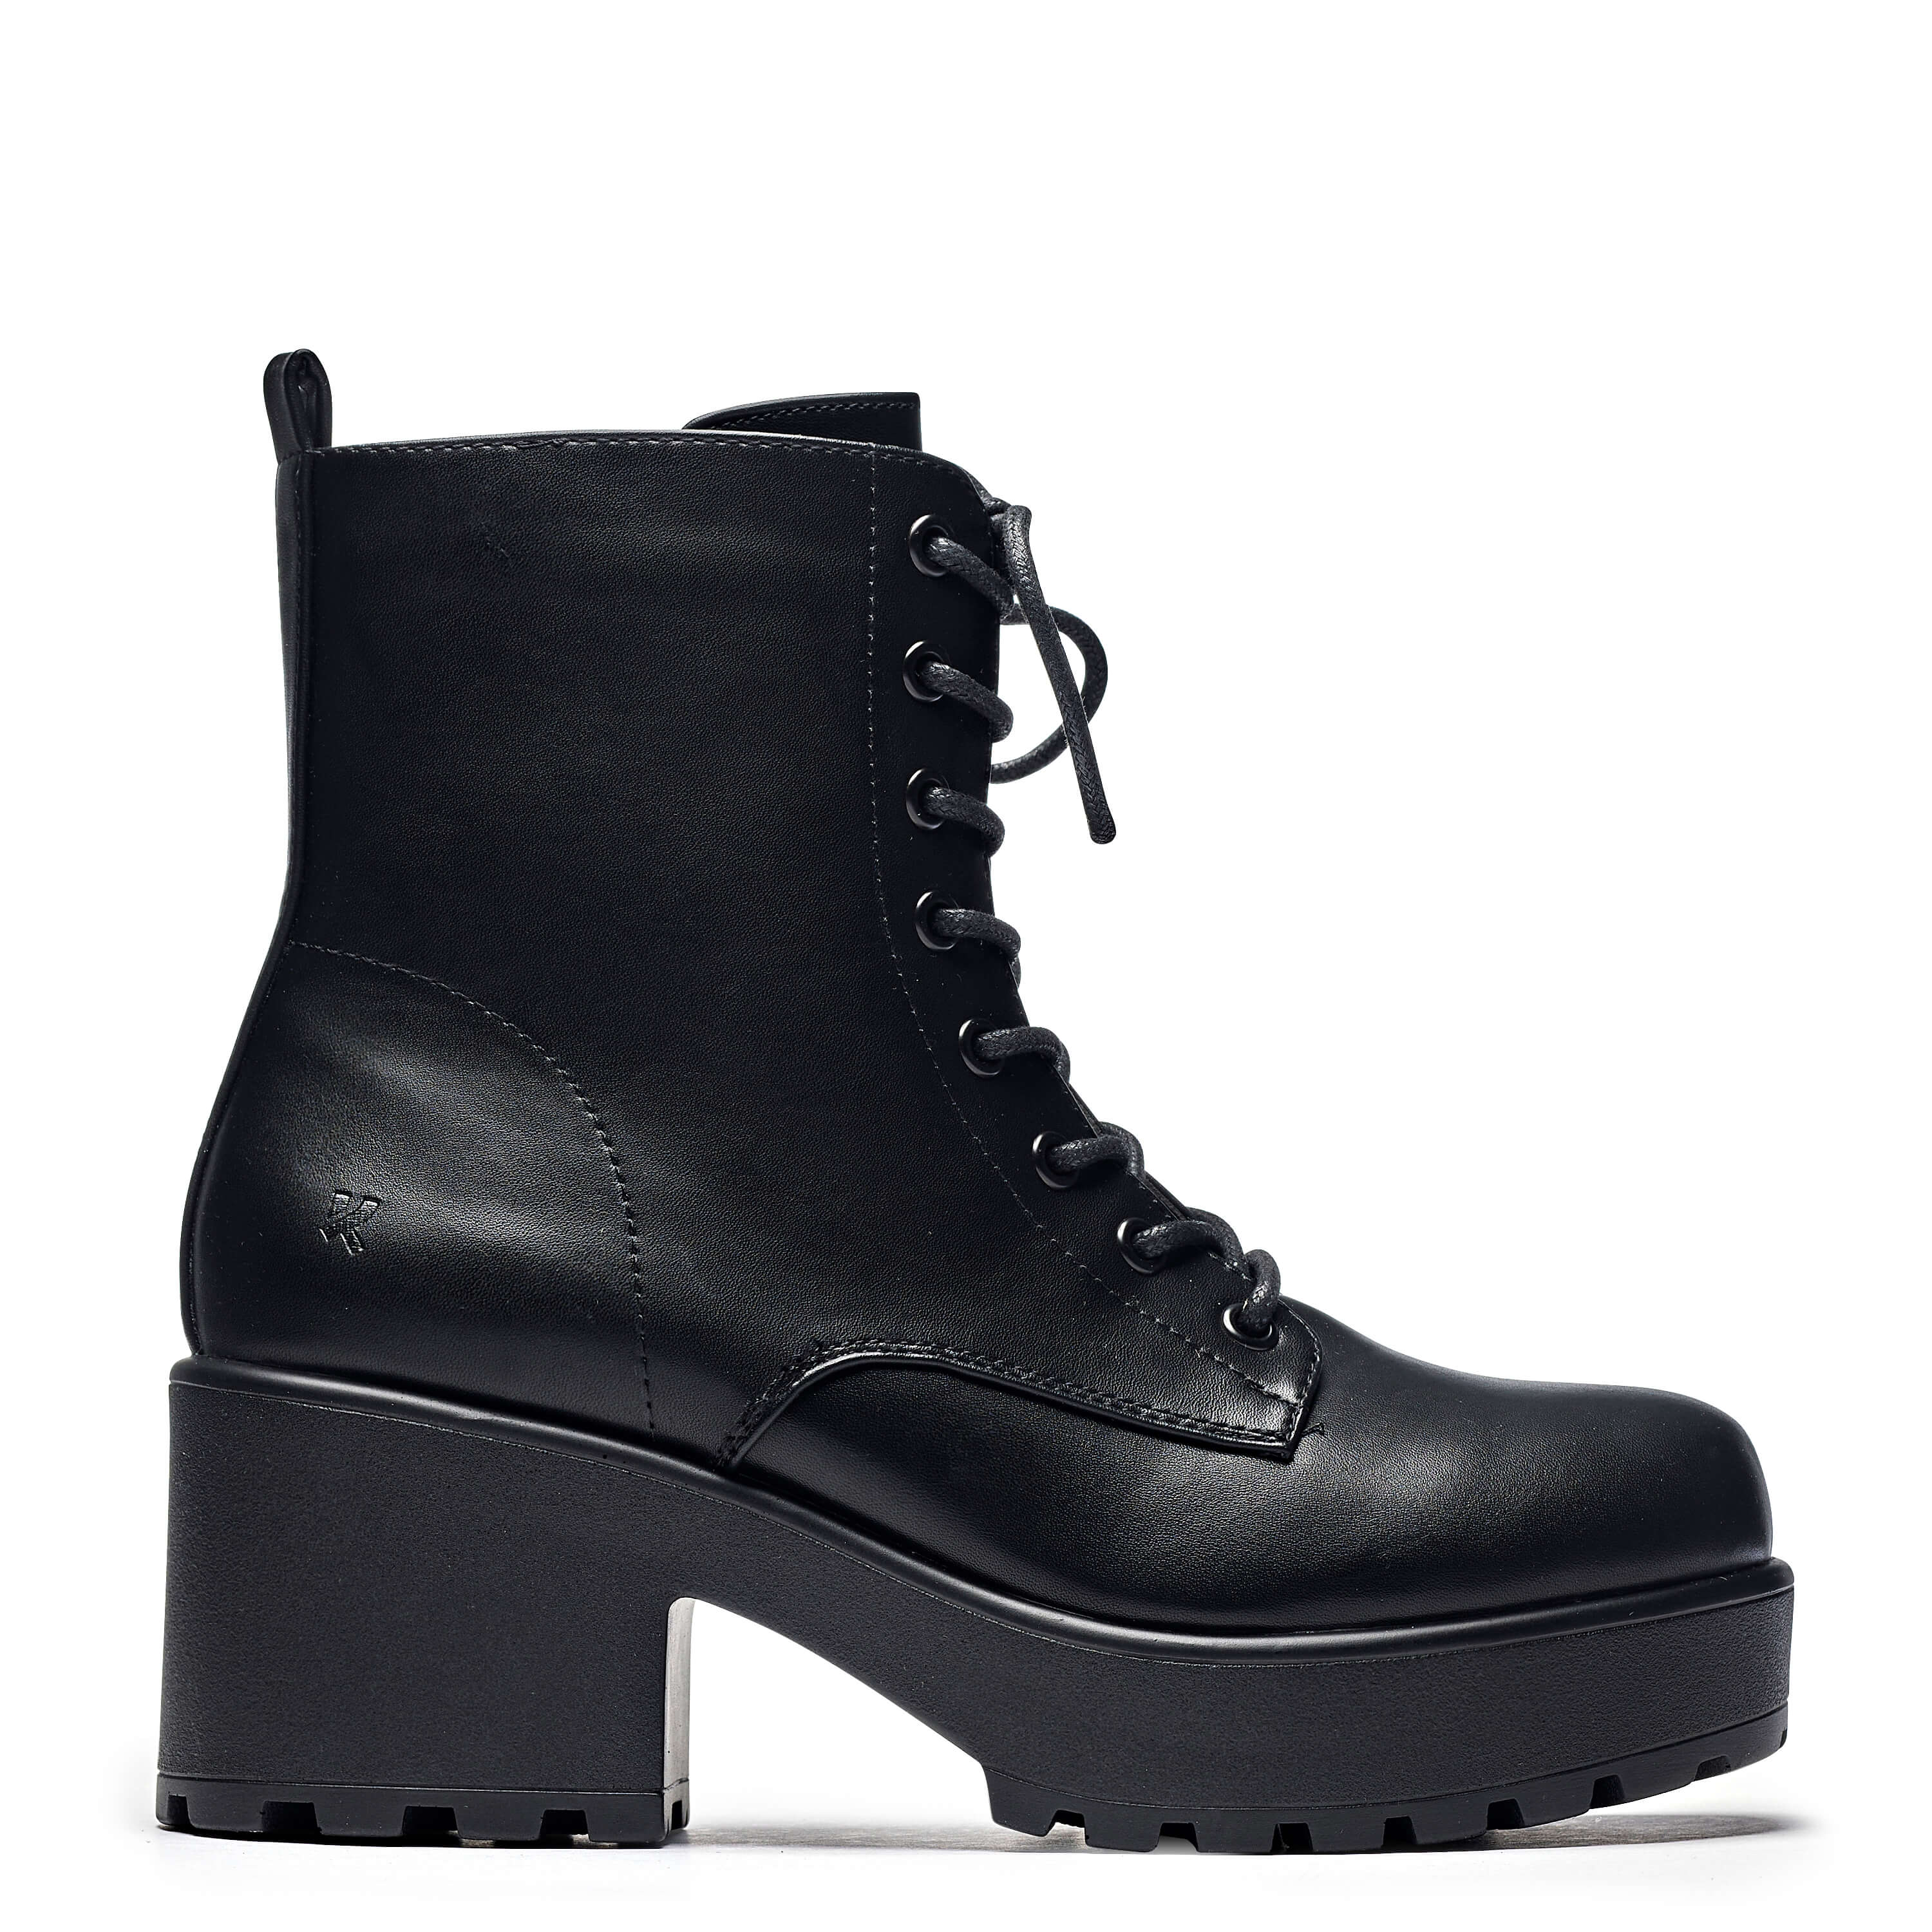 Black Leather Chunky Platform Military Boots in size 10 – KOI footwear